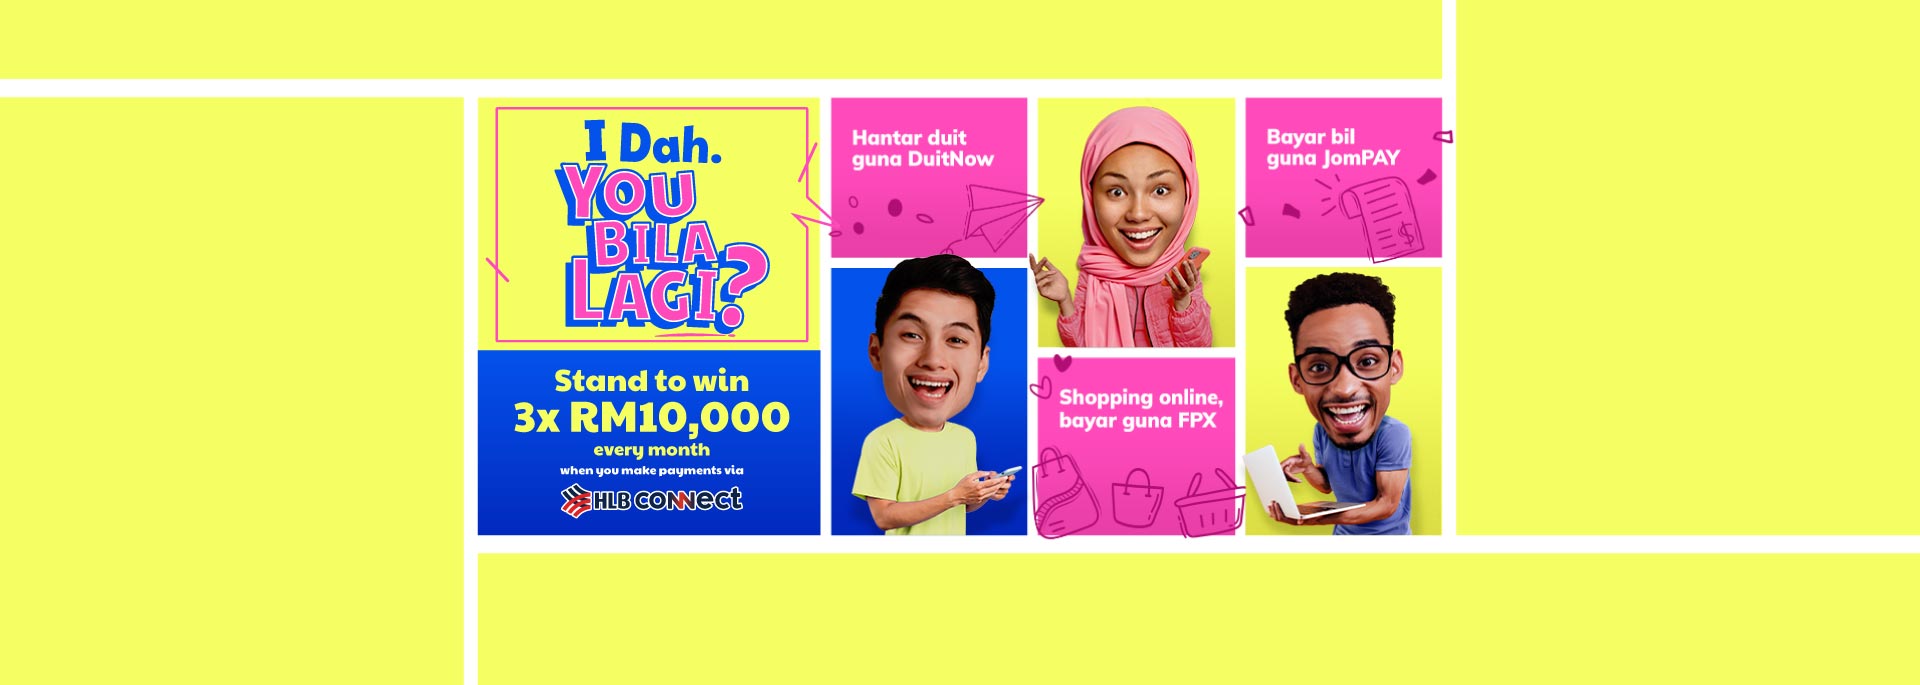 Stand to win RM10,000 when you make payments online